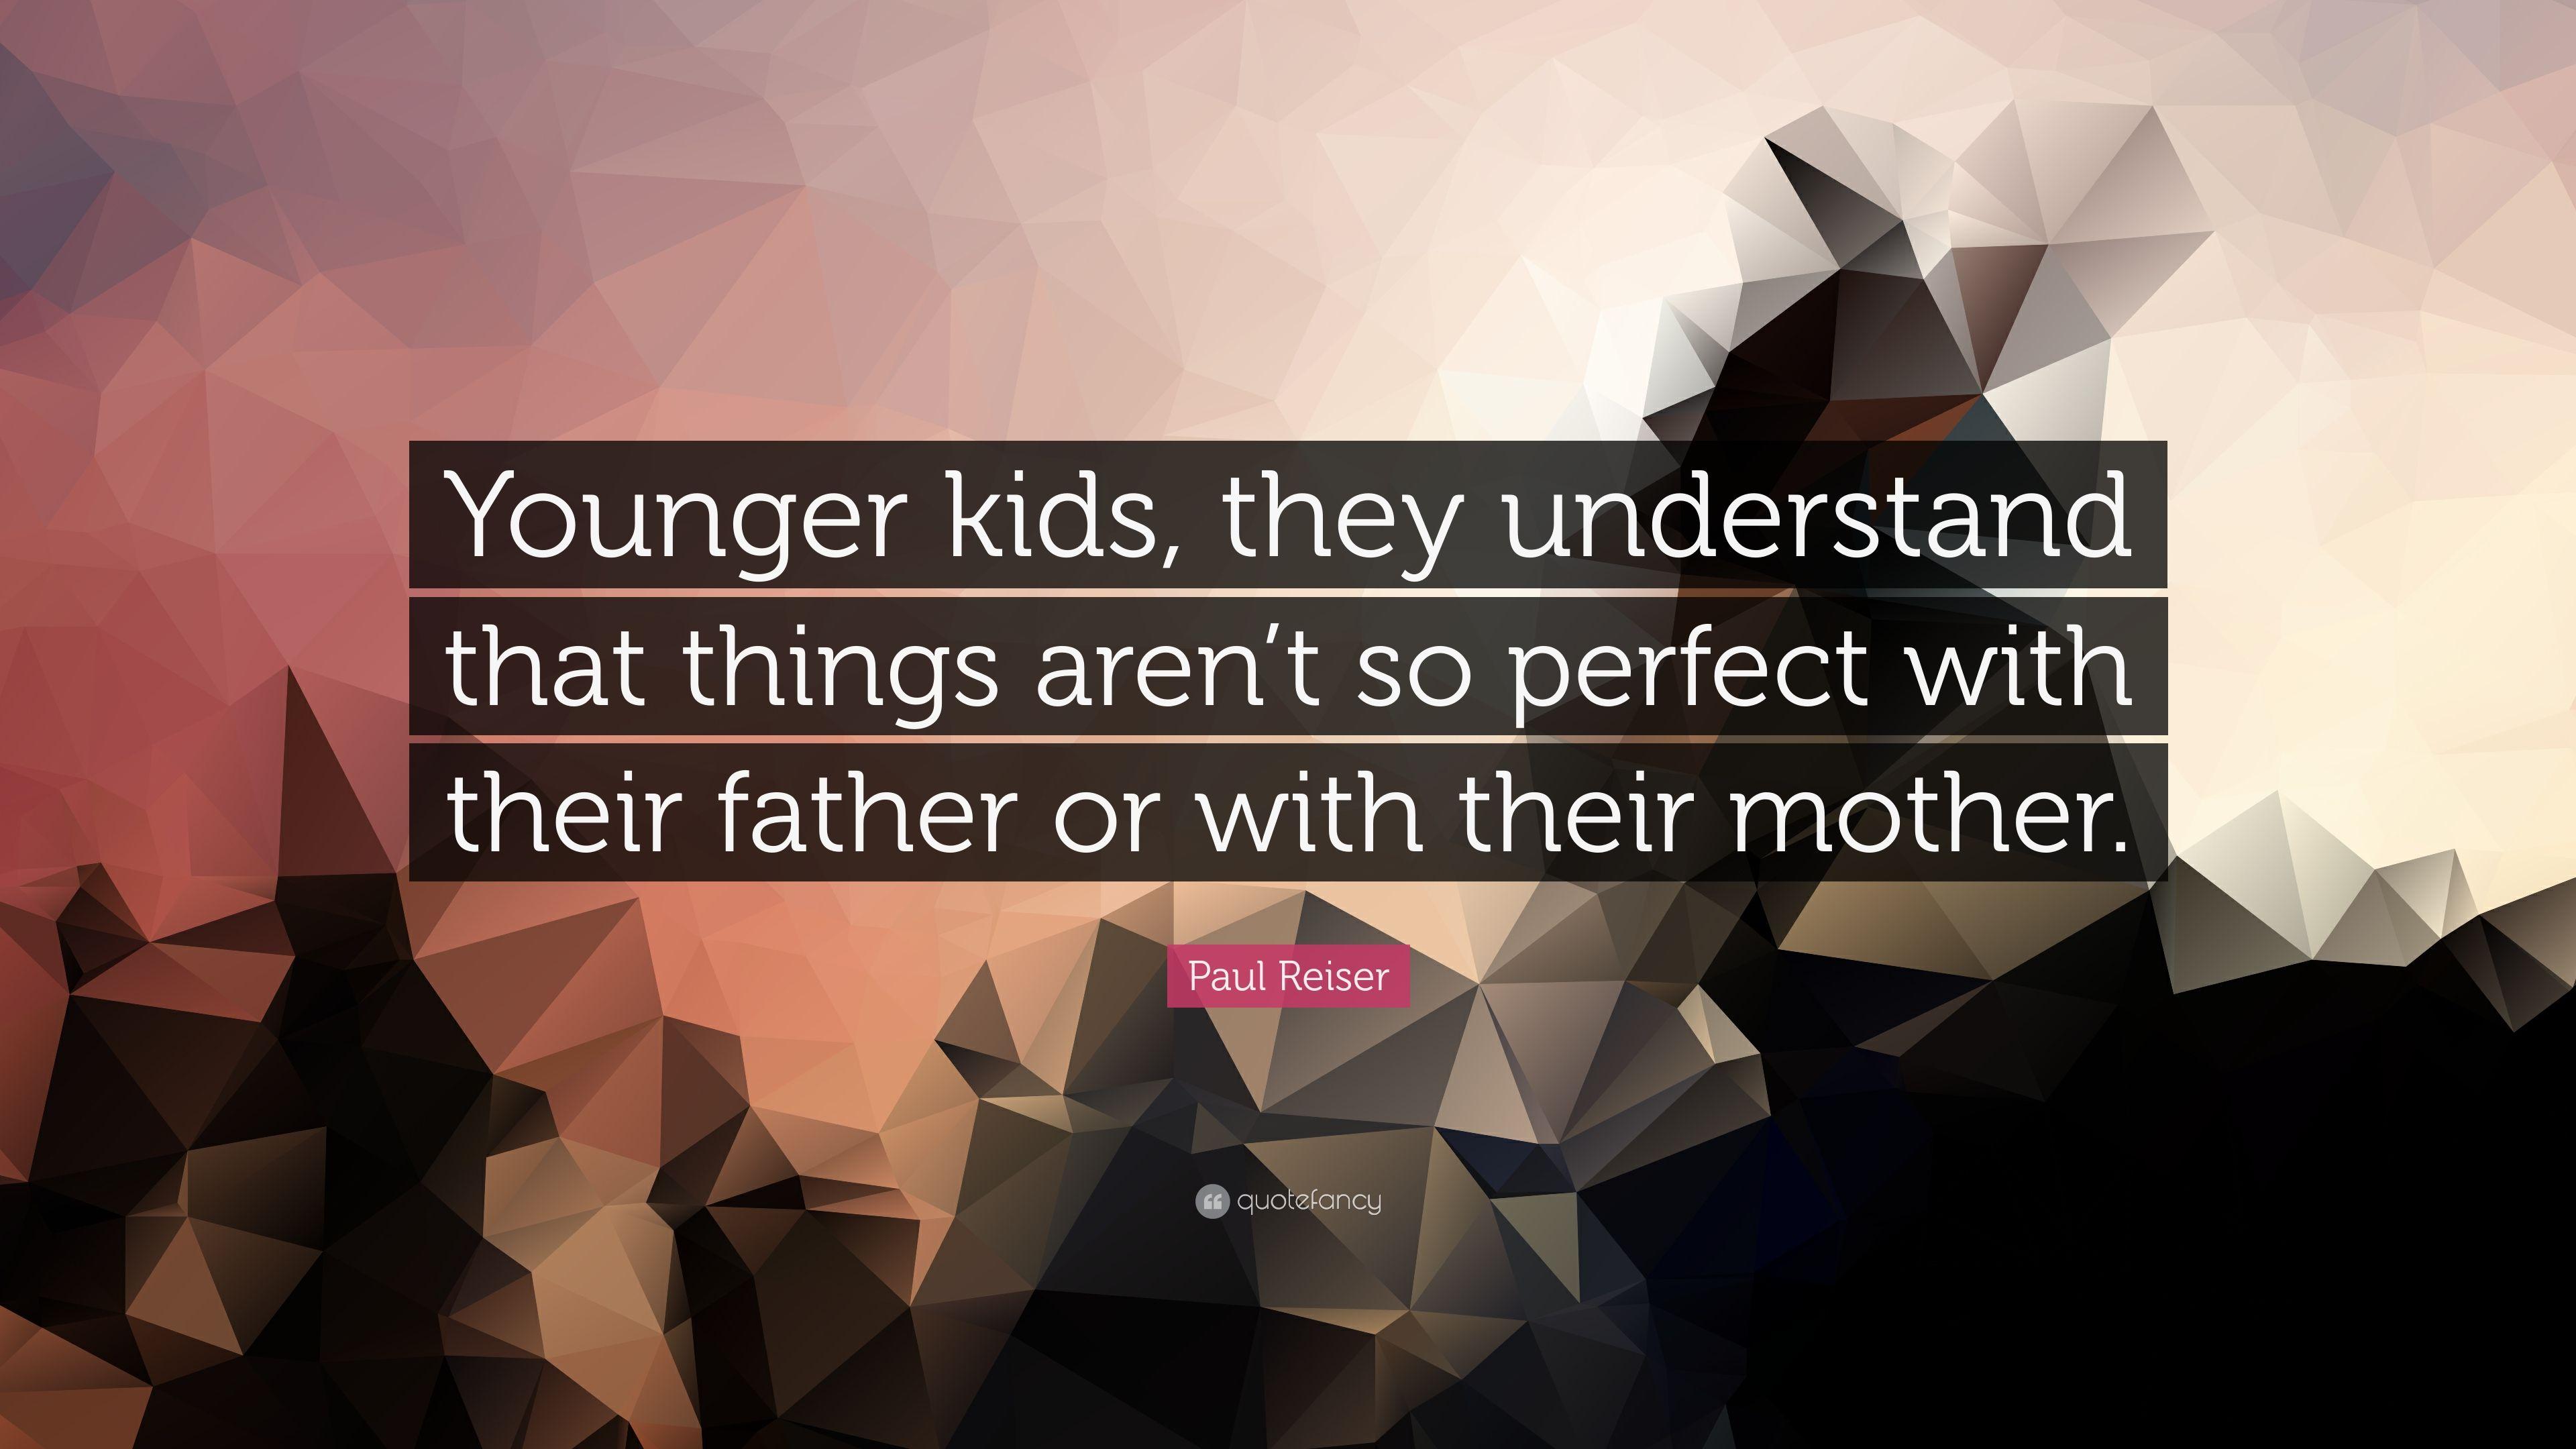 Paul Reiser Quote: “Younger kids, they understand that things aren